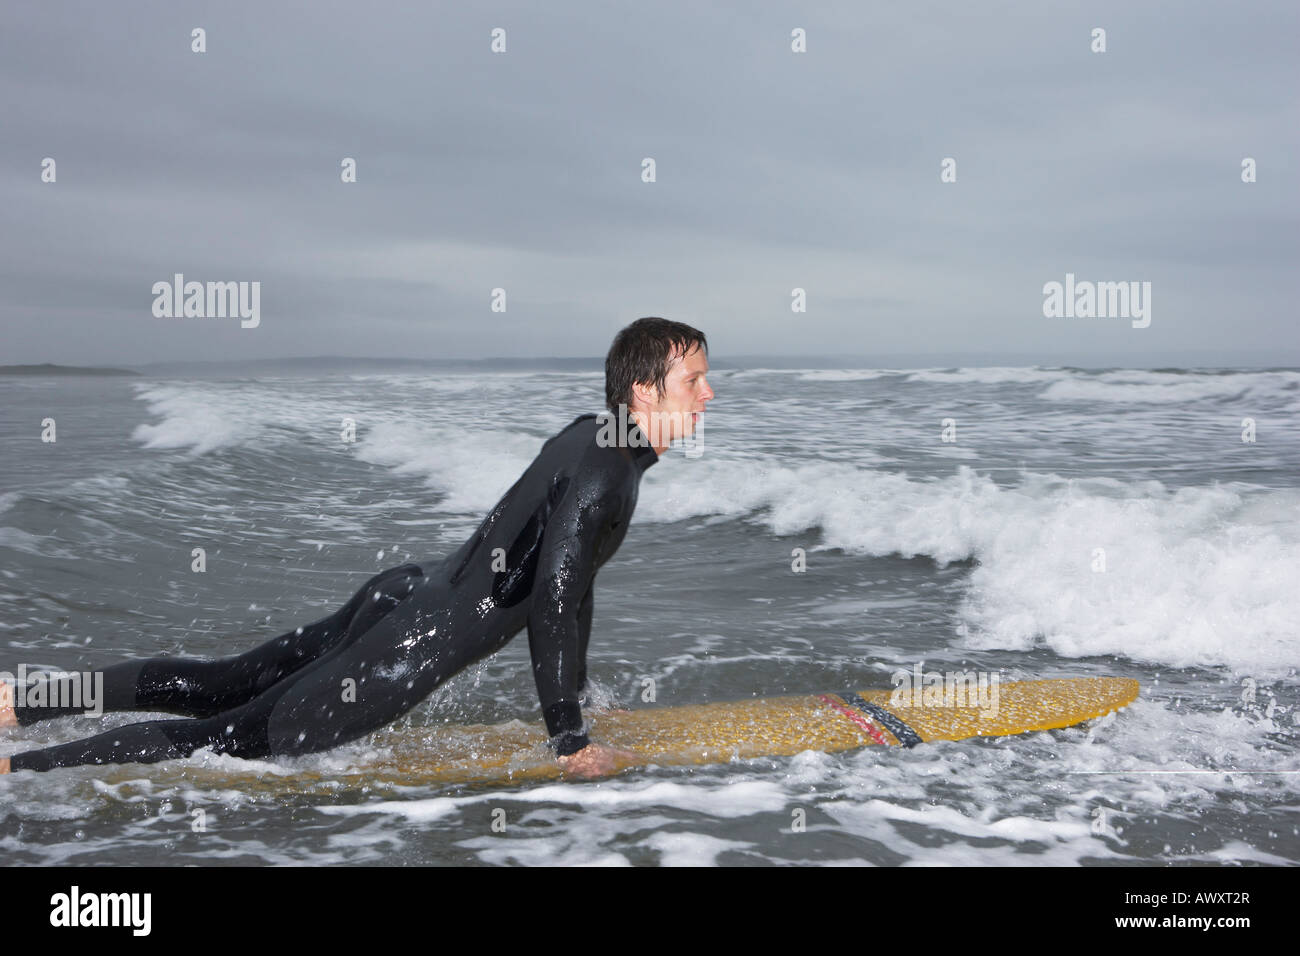 Surfer pulling himself up onto surfboard in water, side view Stock Photo